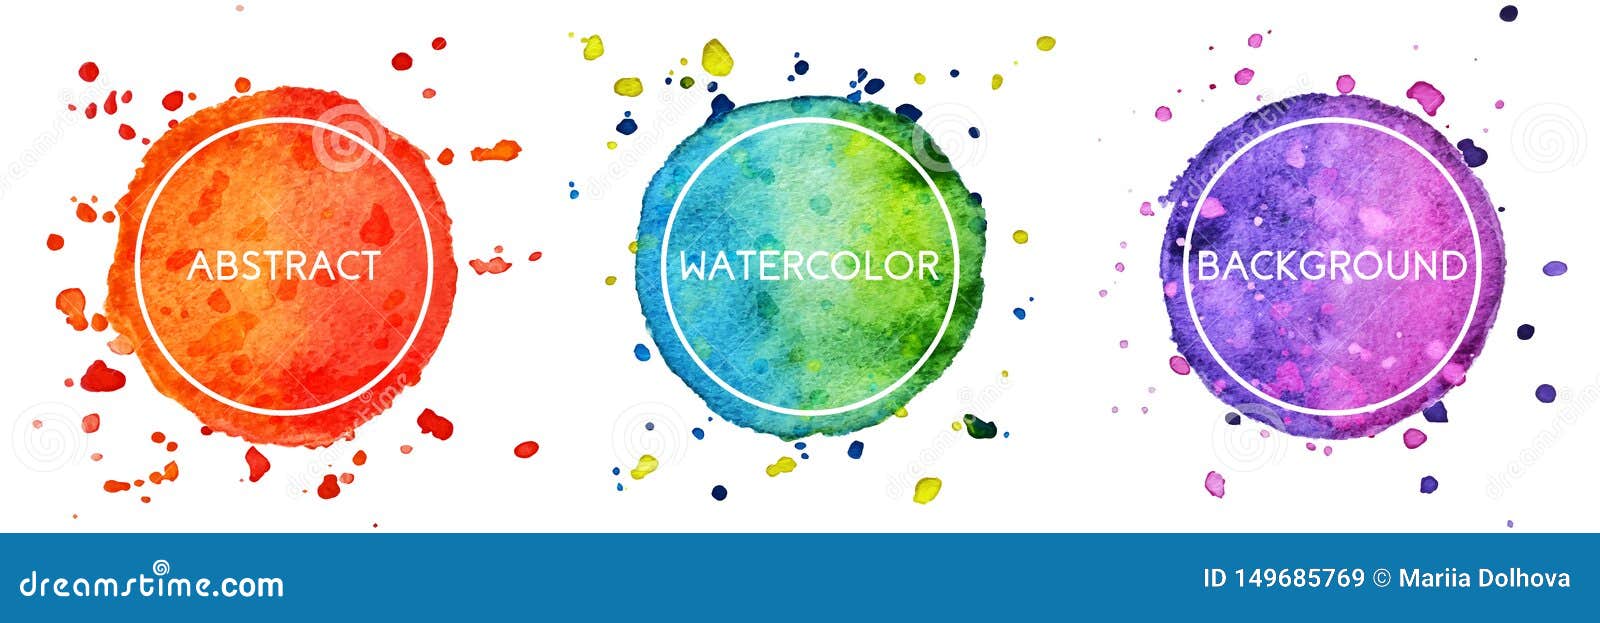 set of 3 multicolor watercolor hand drawn circles background with splashes for logo, emblem